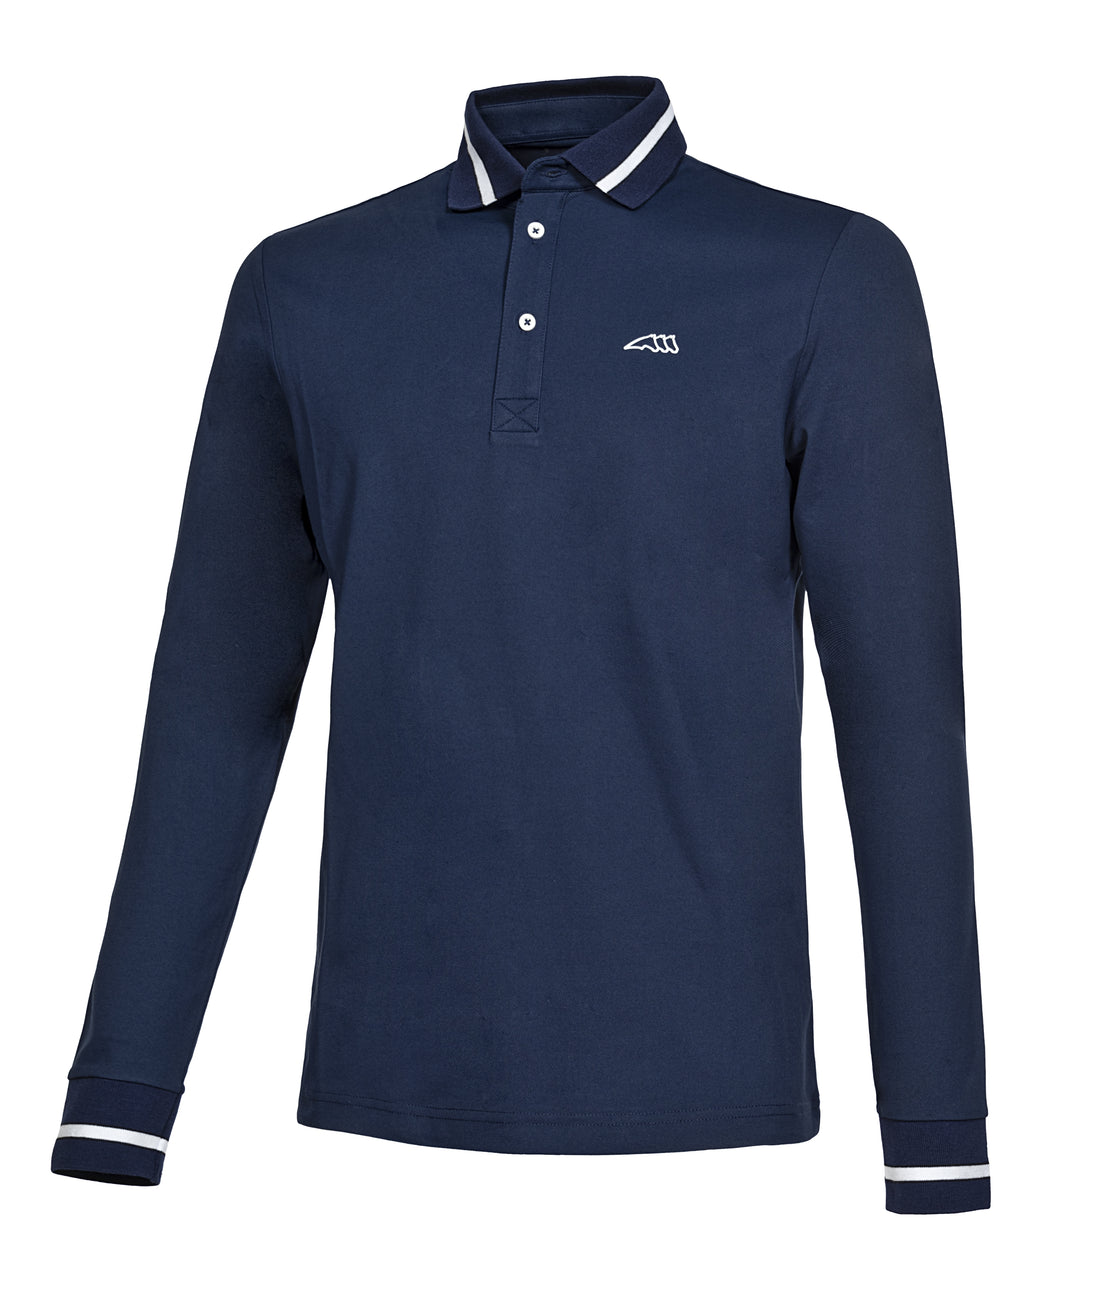 Equiline Egord LS herre Polo, navy